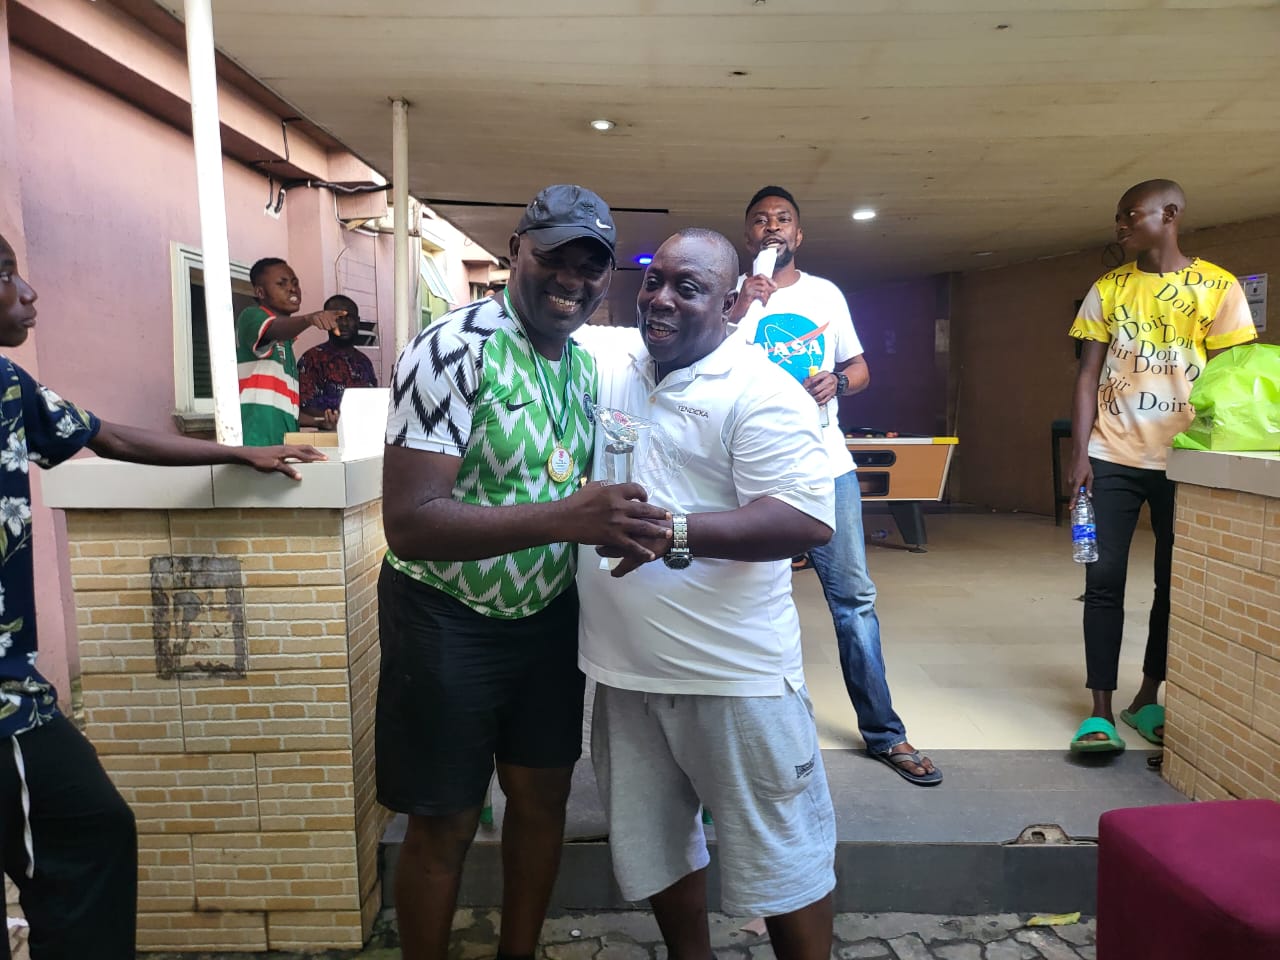 Roseview Court Hotel Holds Table Tennis Tournament